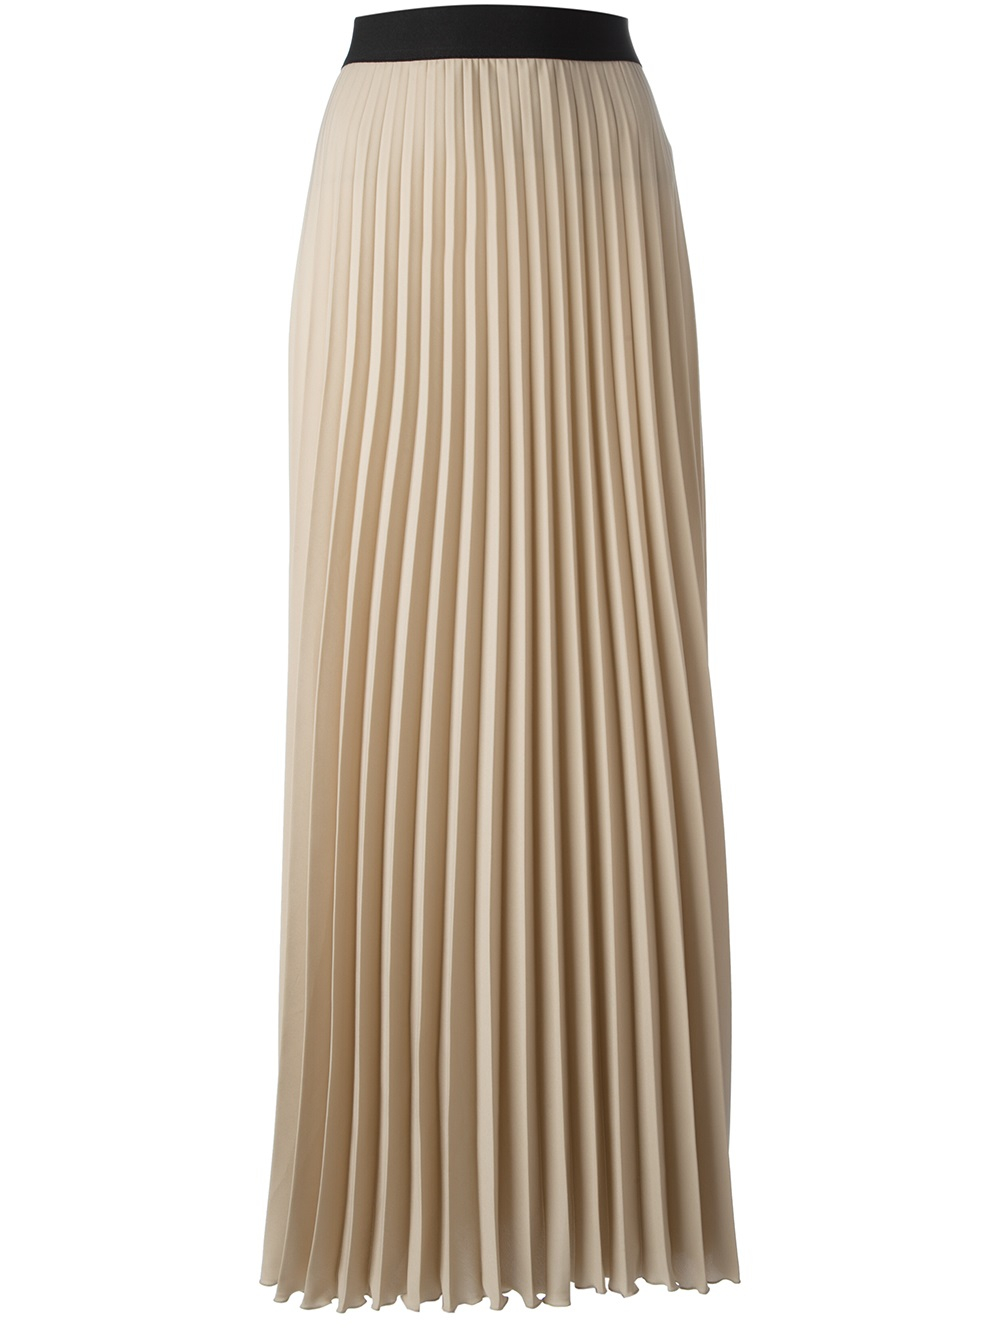 Lyst - P.A.R.O.S.H. Long Pleated Skirt in Natural